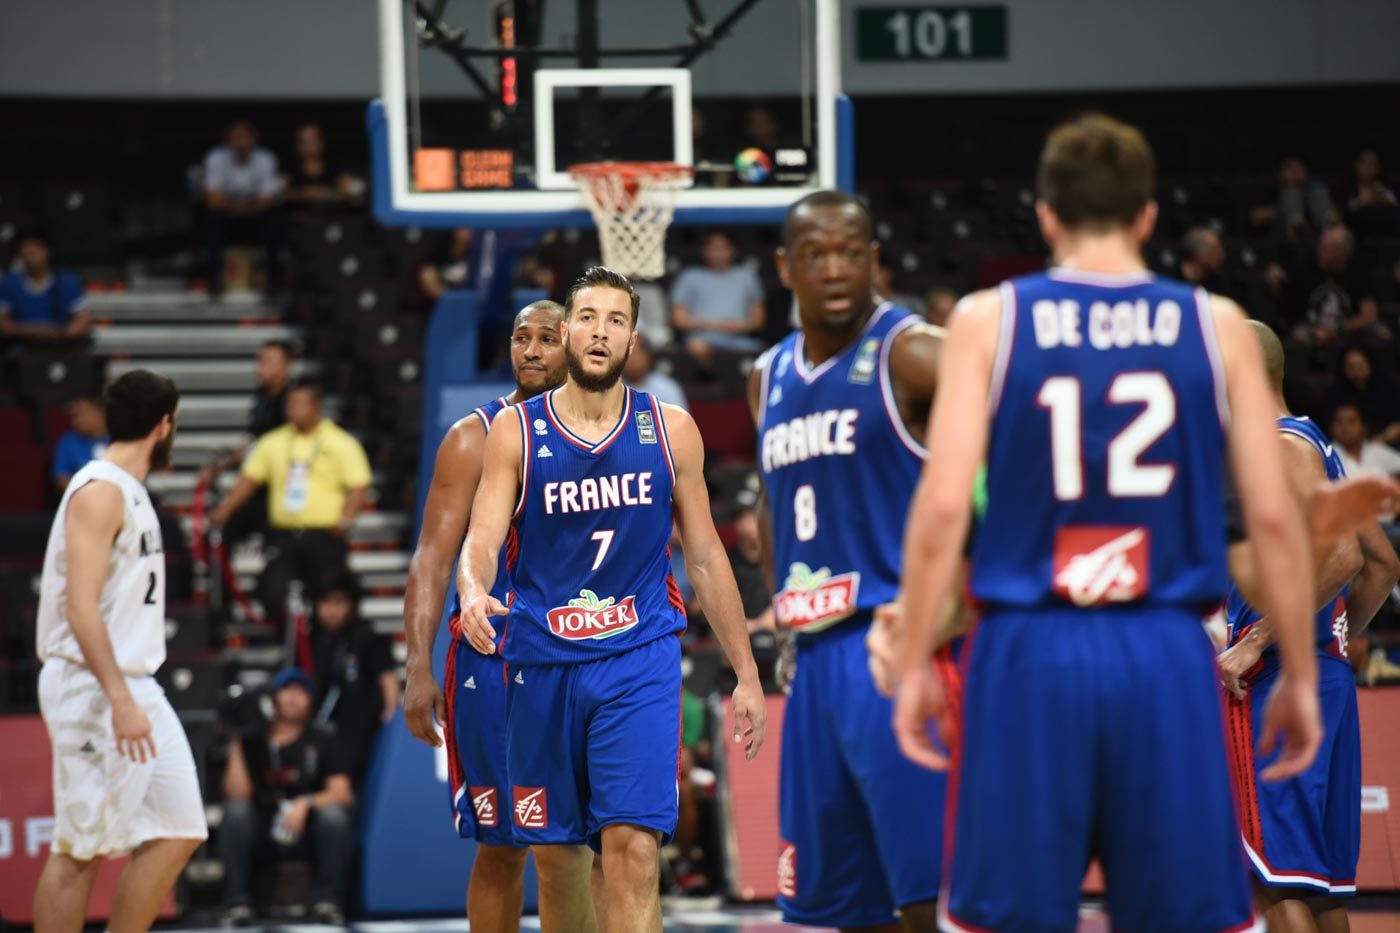 Parker, Diaw hope to duplicate France’s Euro 2016 success